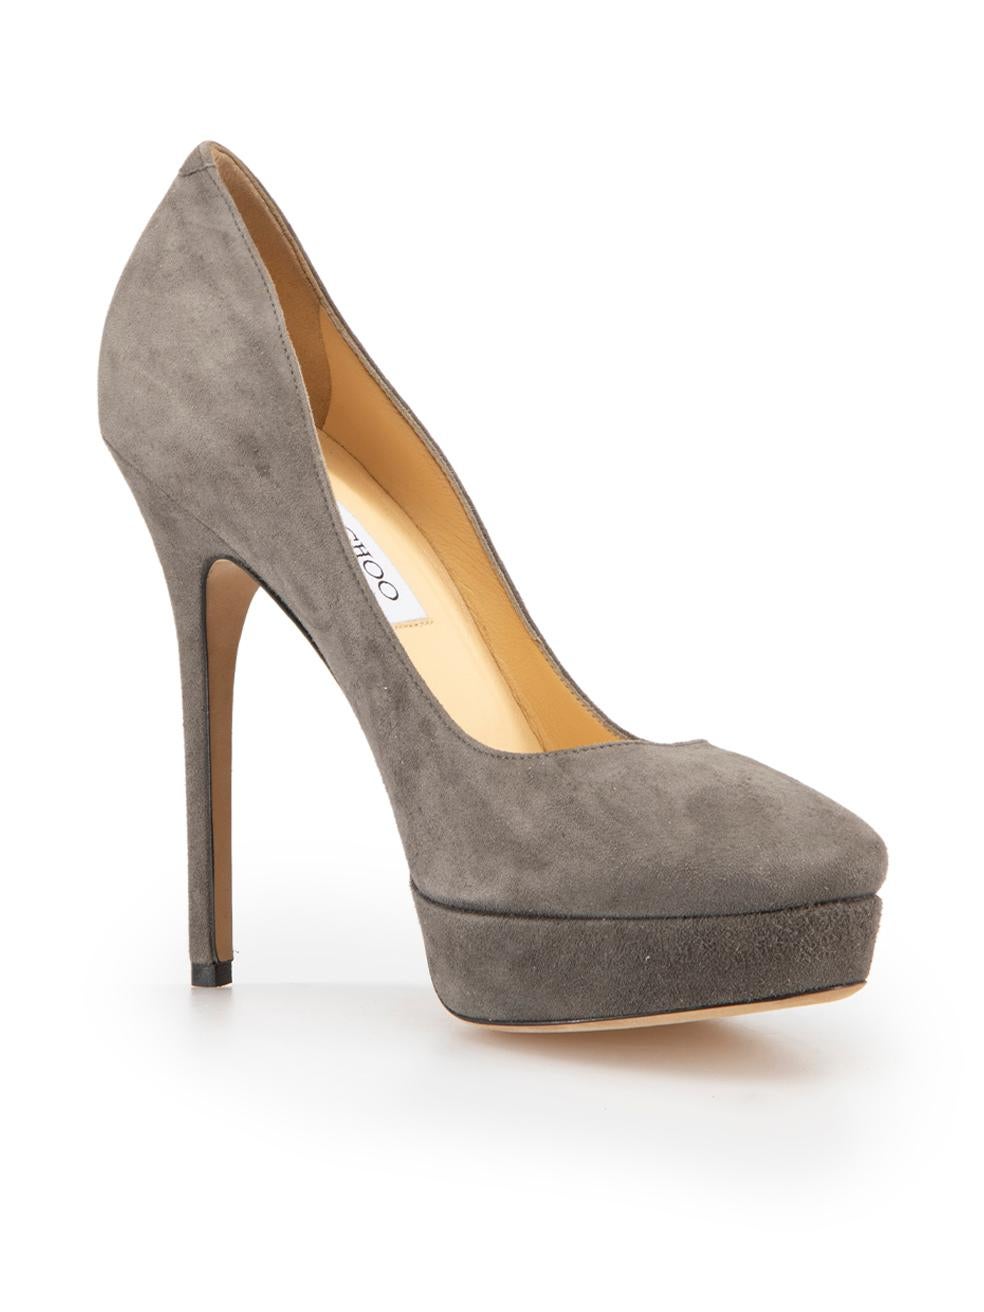 CONDITION is Good. Minor wear to shoes is evident. Light wear to both sides of both shoes with spotting on this used Jimmy Choo designer resale item.



Details


Grey

Suede

Pumps

Almond-toe

Slip-on

Platform



 

Made in